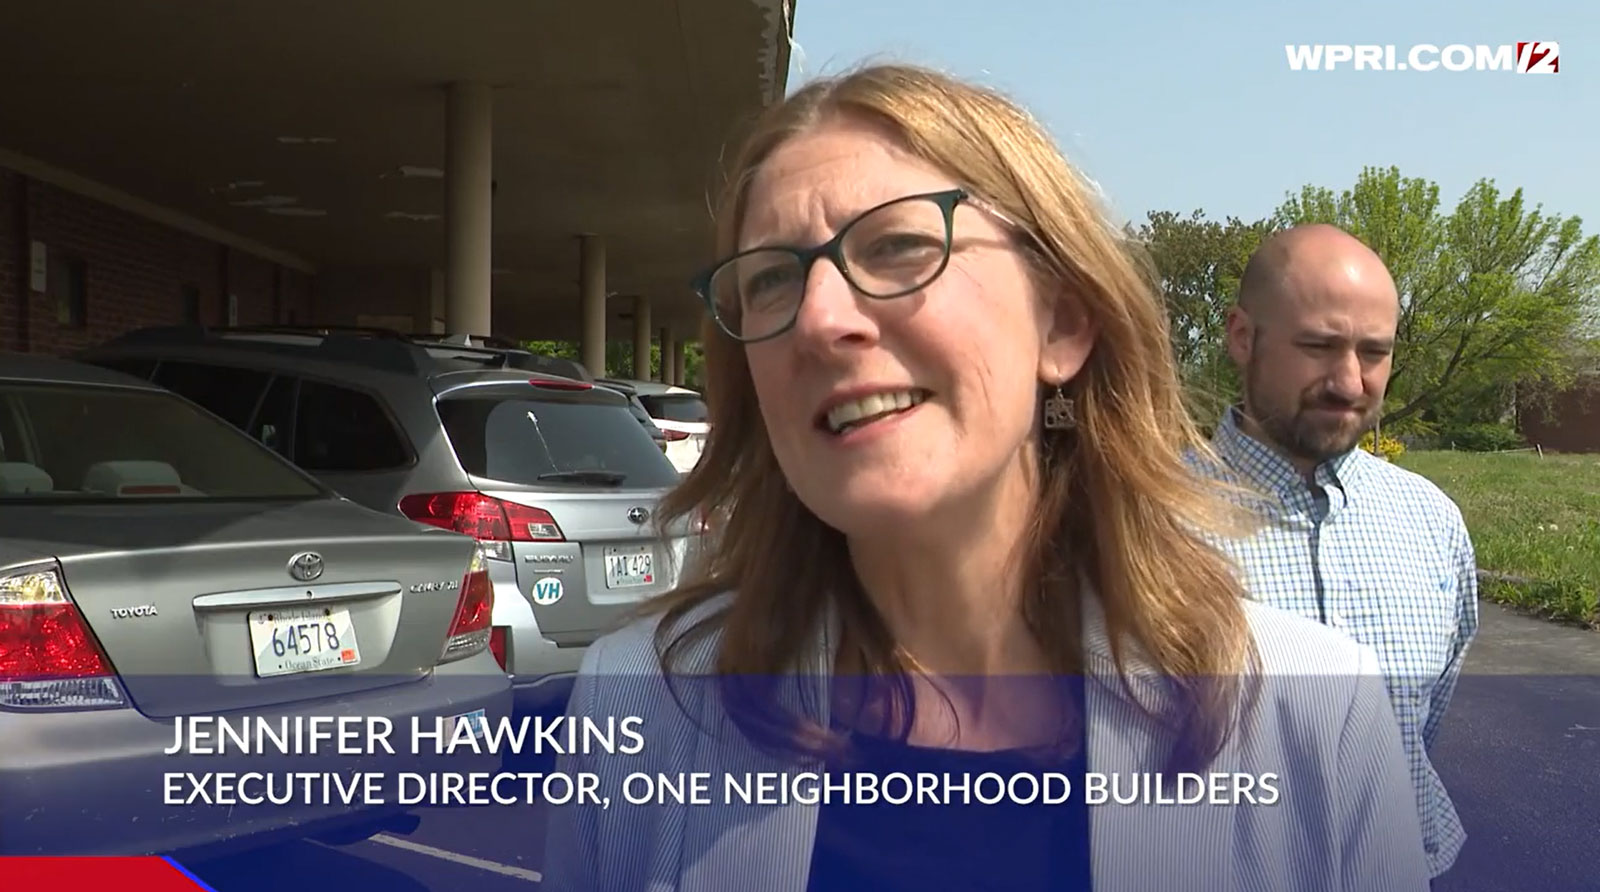 Jennifer Hawkins, Executive Director of ONE Neighborhood Builders, speaks with WPRI about the proposed development of 160 affordable apartments on Taunton Avenue in East Providence, during a press tour of the property on May 11, 2023. WPRI screen capture